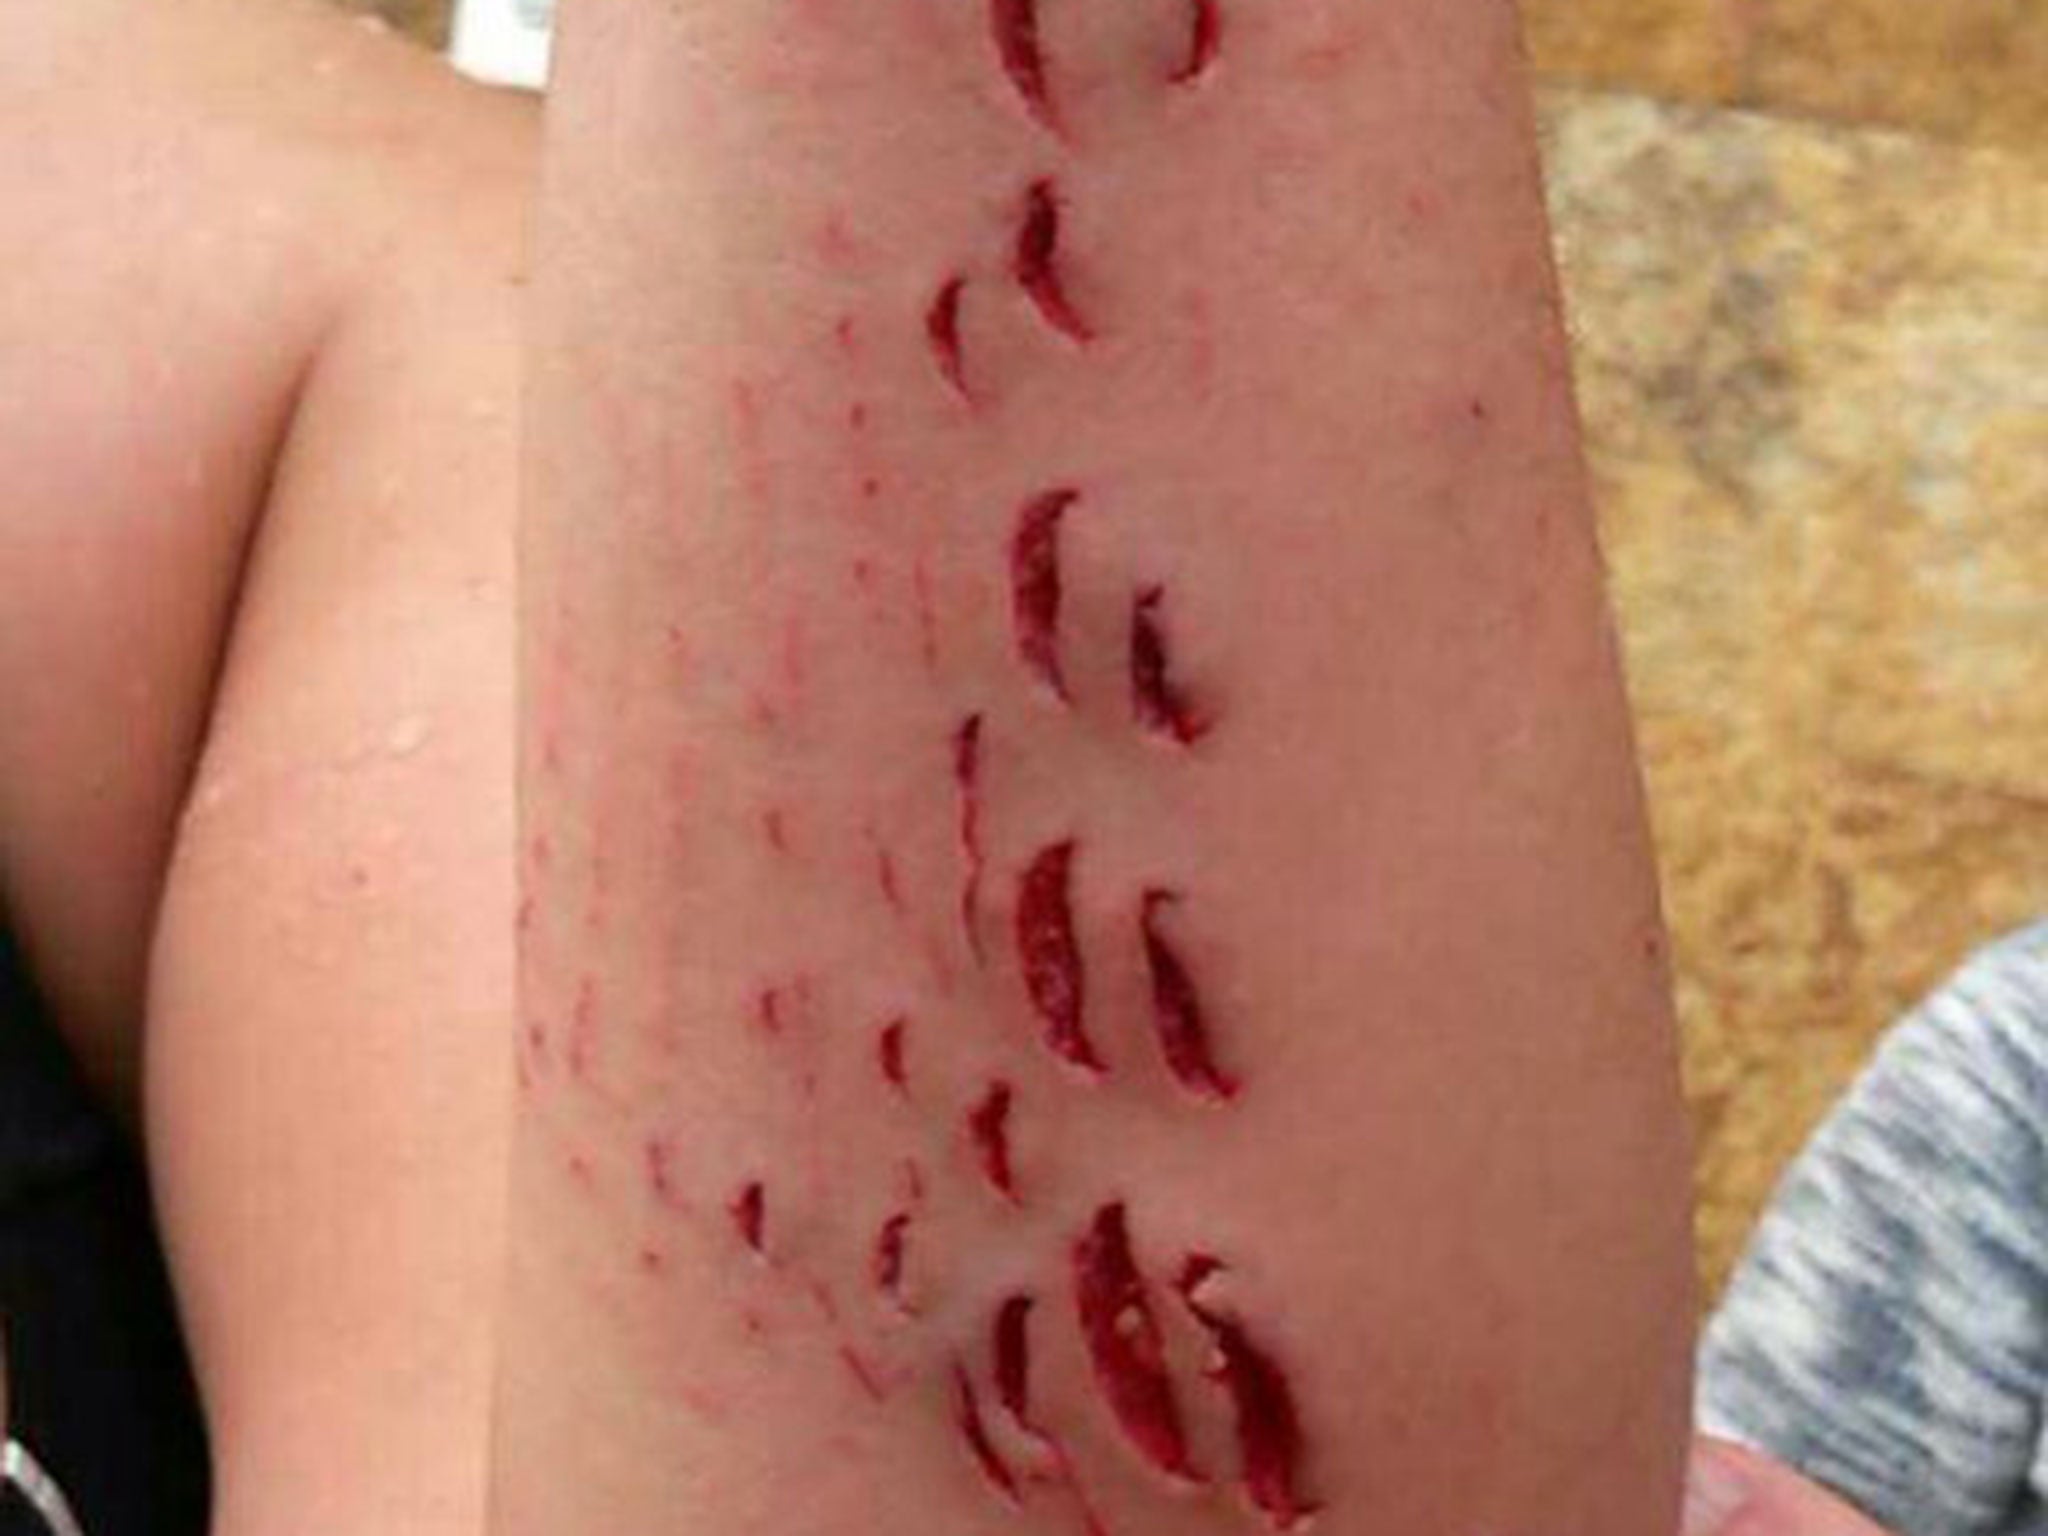 Cristina Ojeda-Thies tweeted a photograph of the shark's tooth-marks on her arm after she was treated in hospital